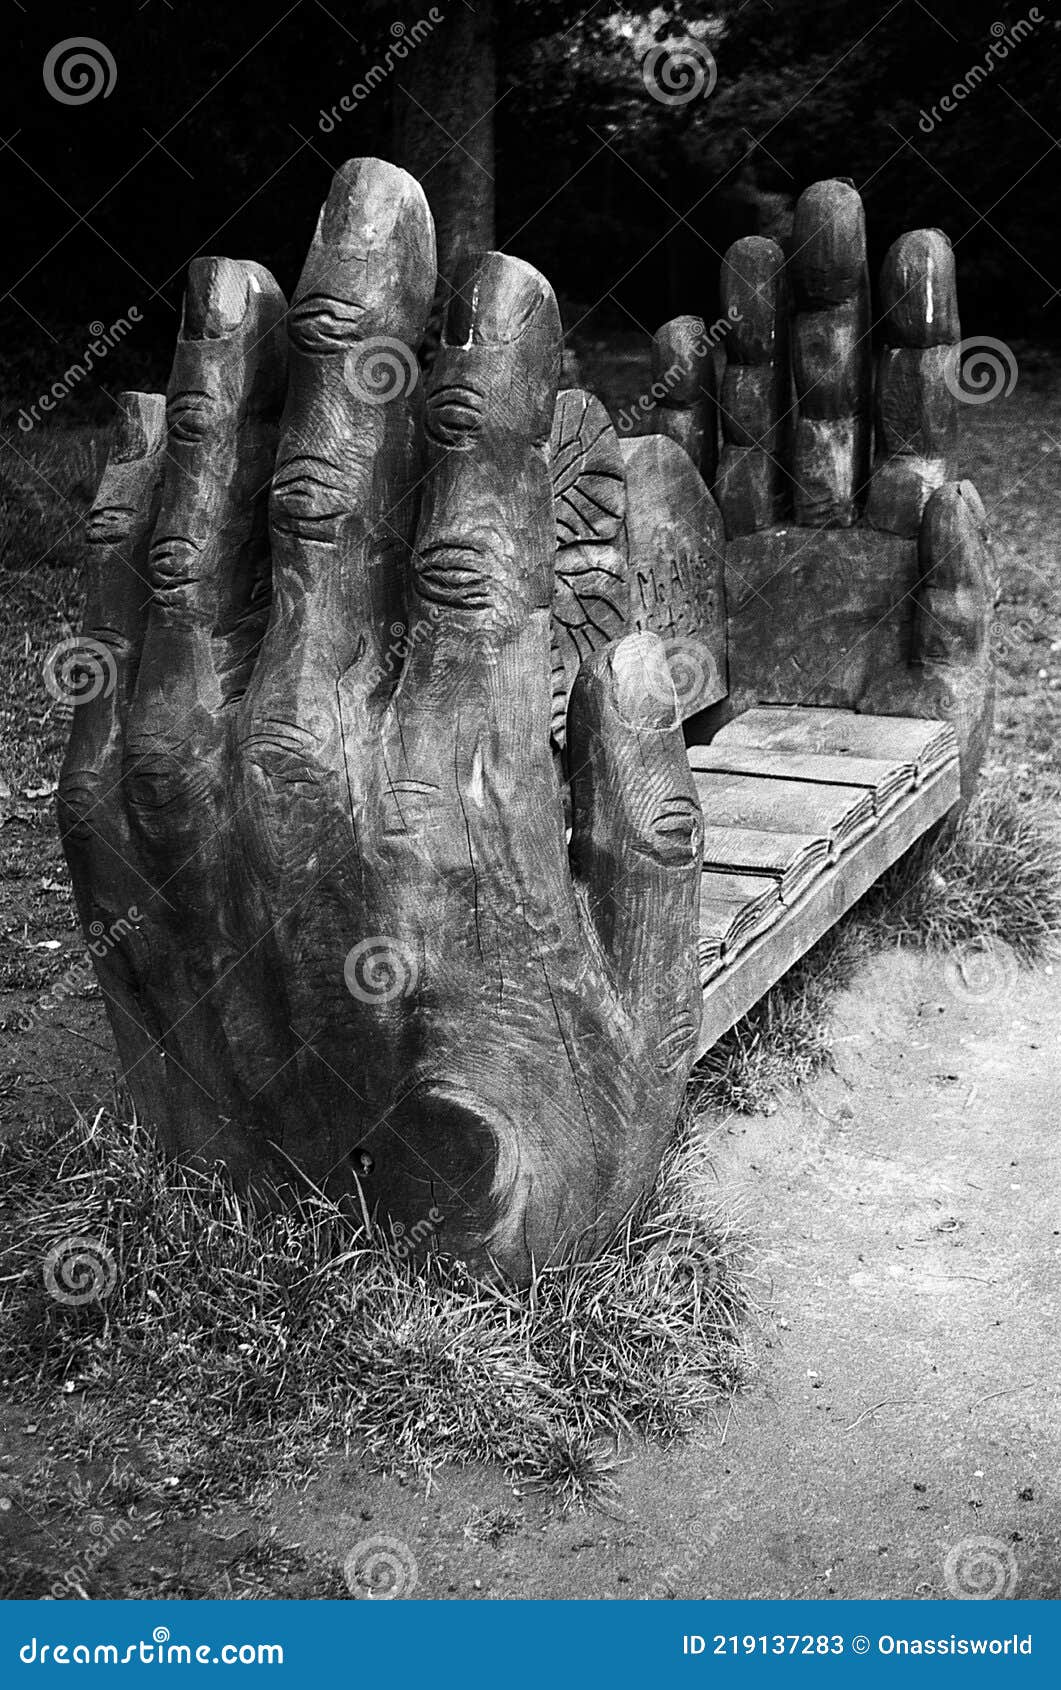 wood carved hands - ilford fp4 plus b&w film